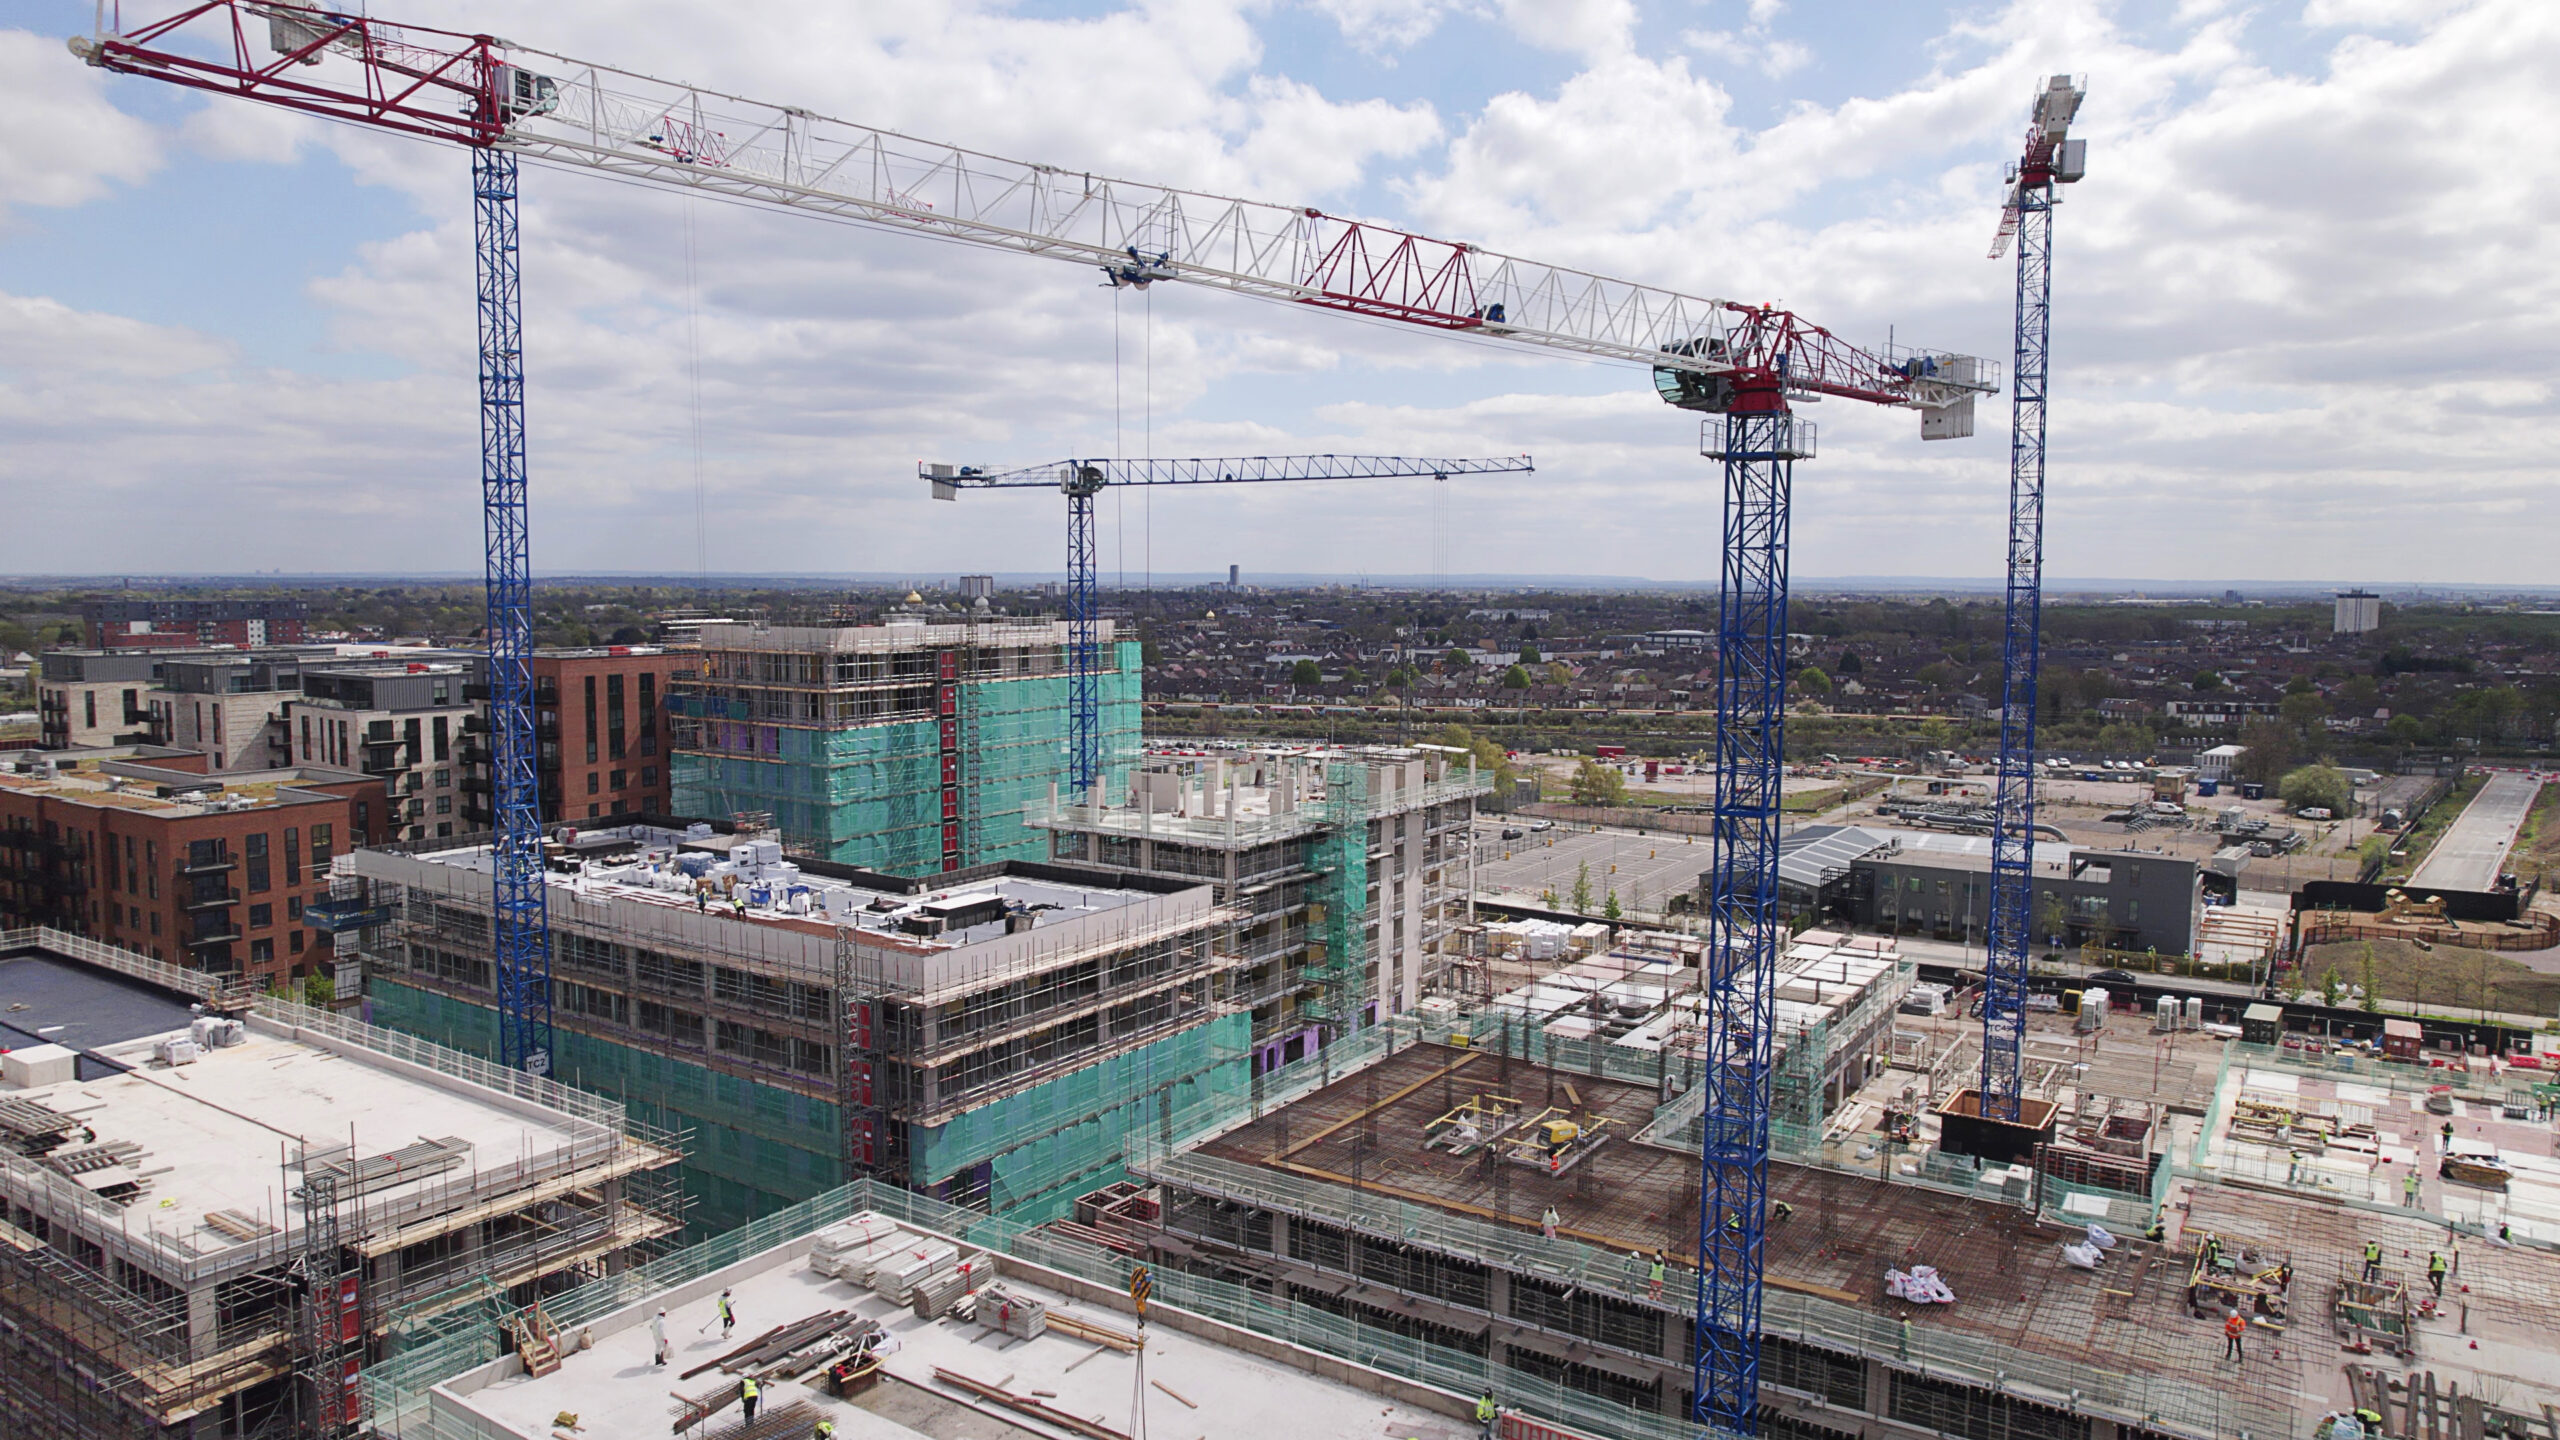 Bennetts provides four Raimondi flat-tops for one of London’s biggest re-urbanisation projects